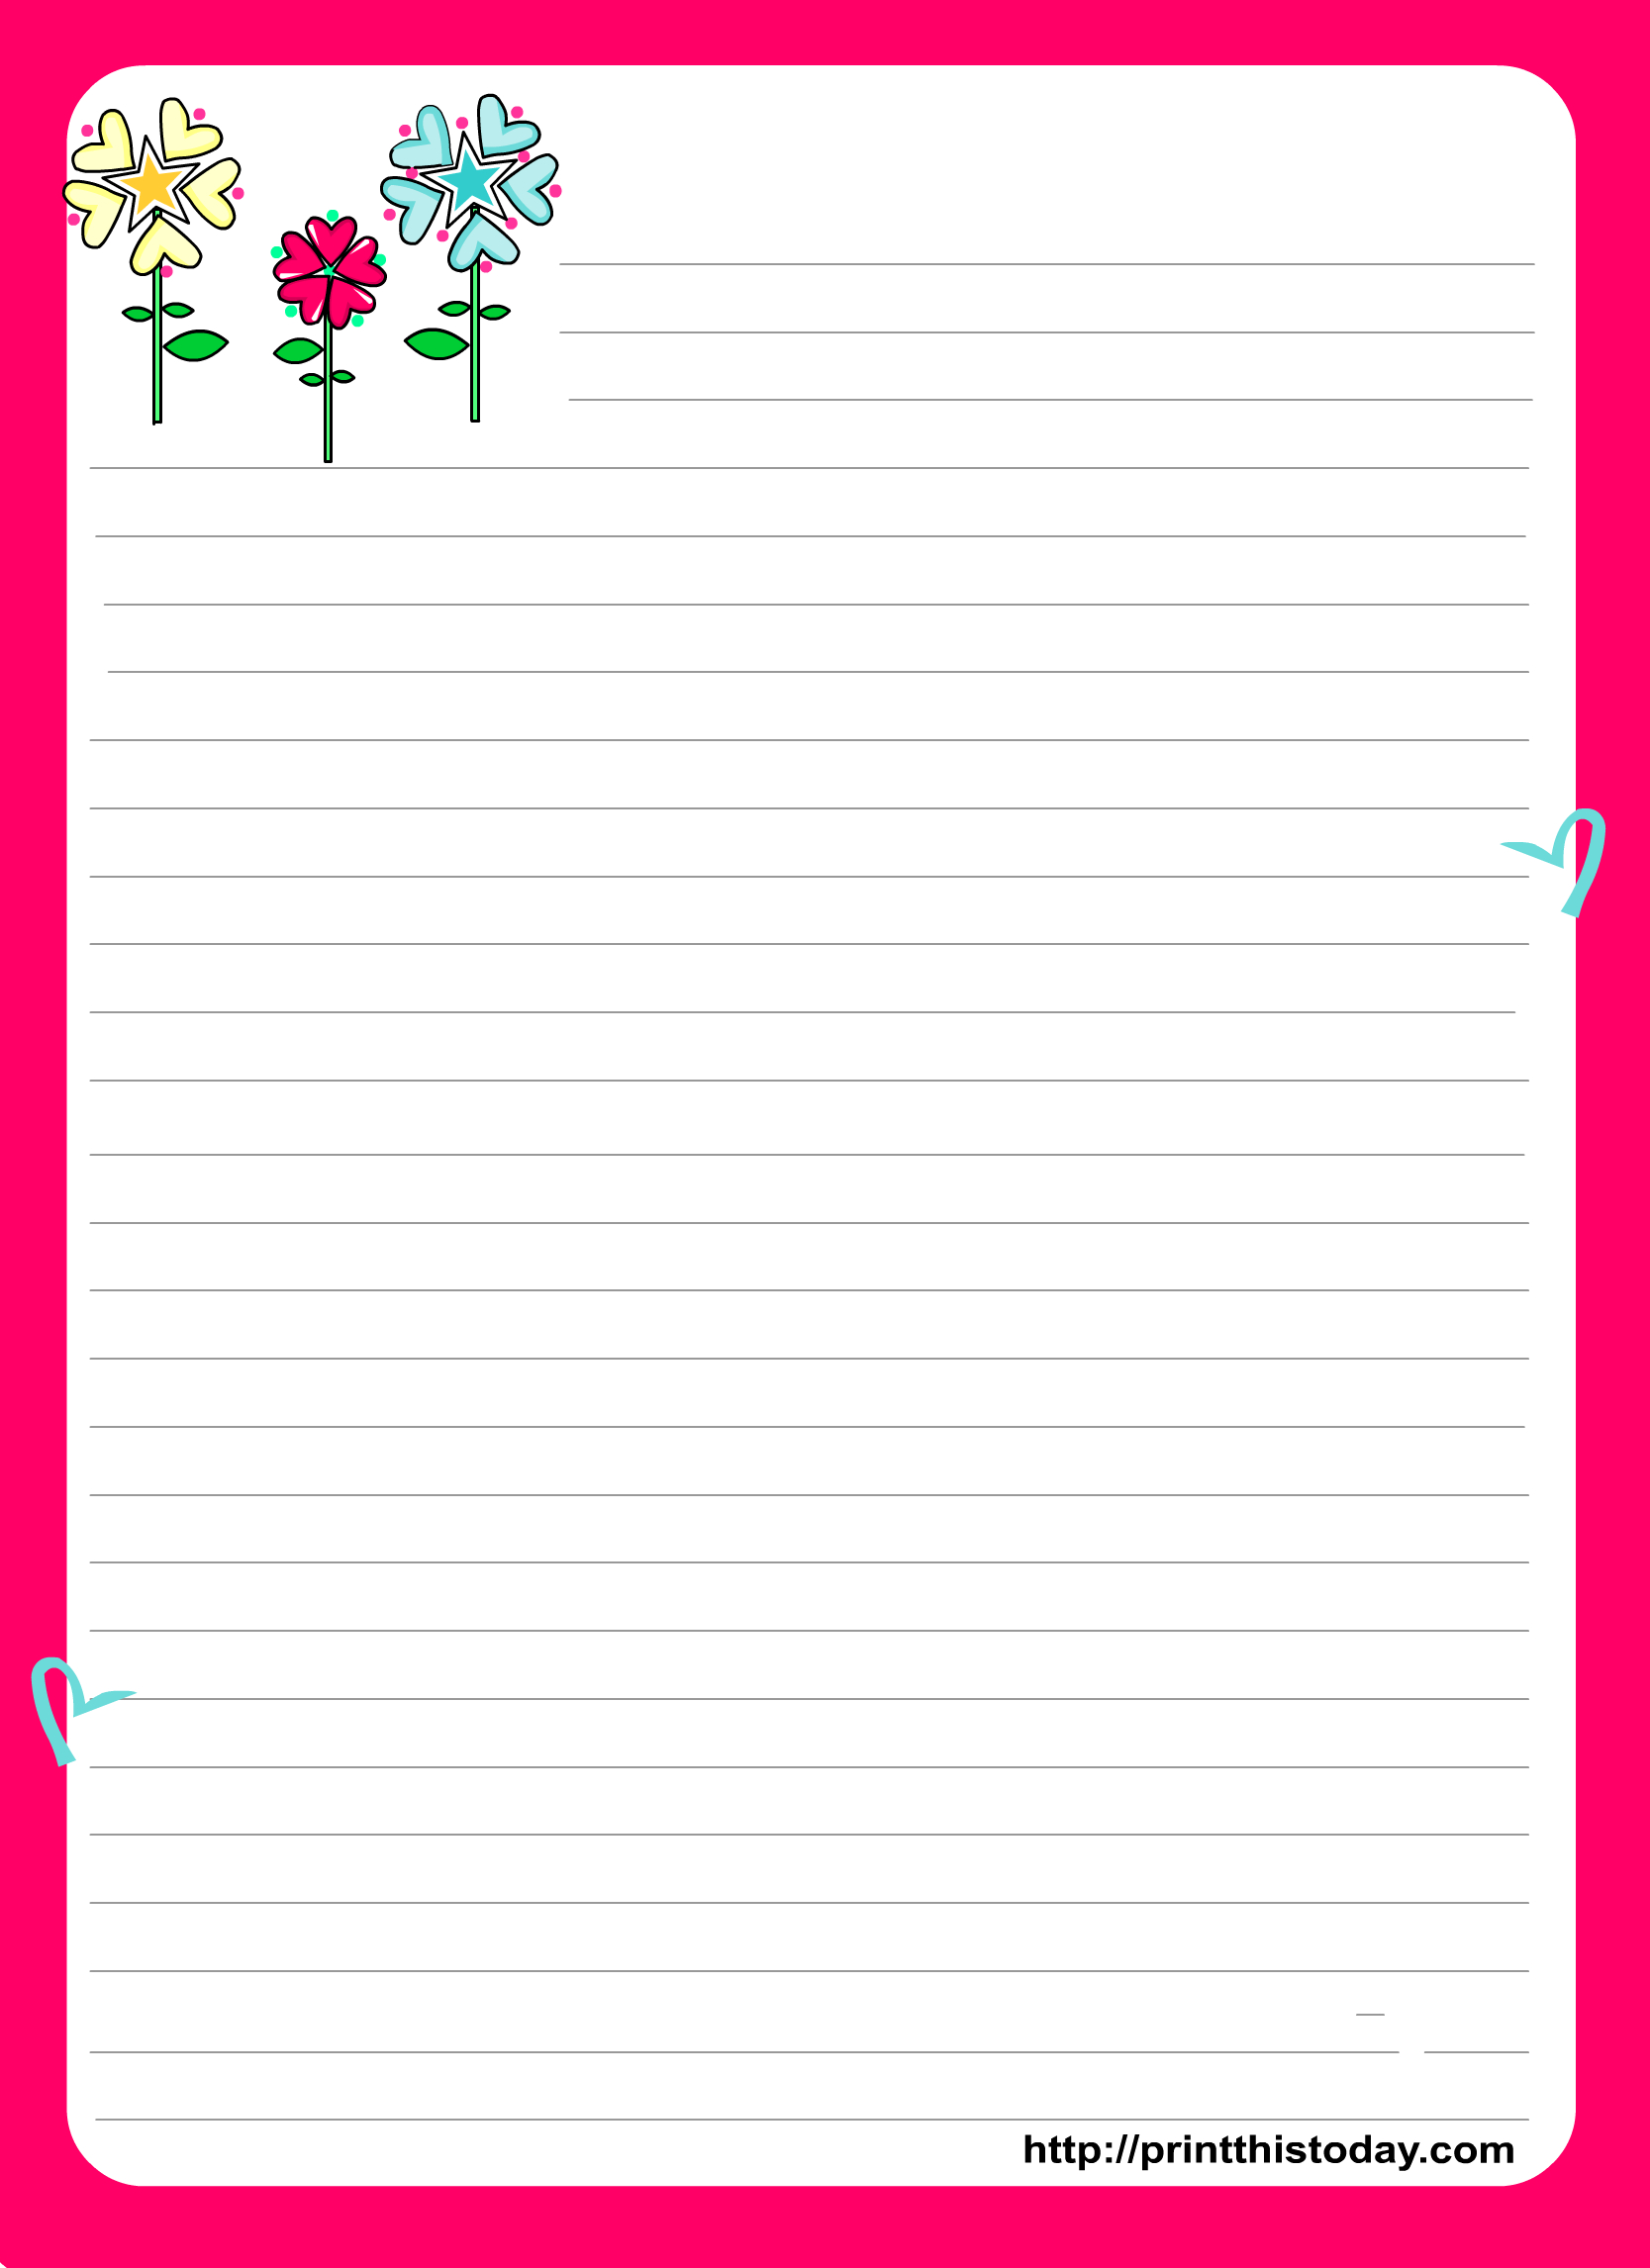 Love Letter Pad Stationery - Free Printable Love Letter Paper